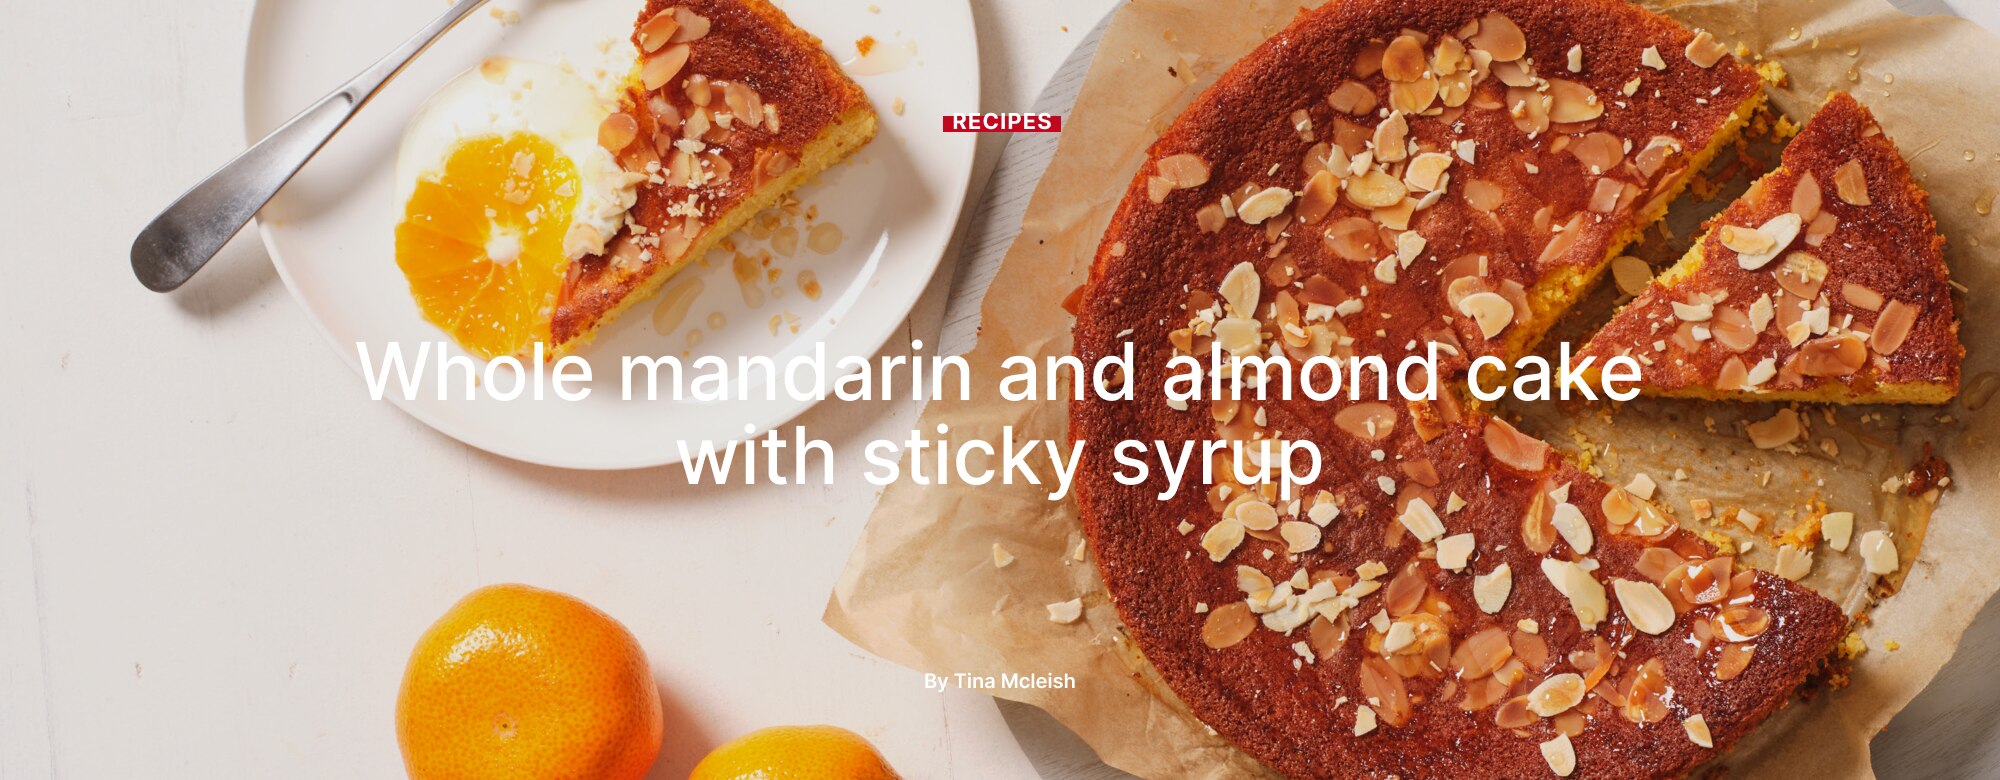 Whole mandarin and almond cake with sticky syrup